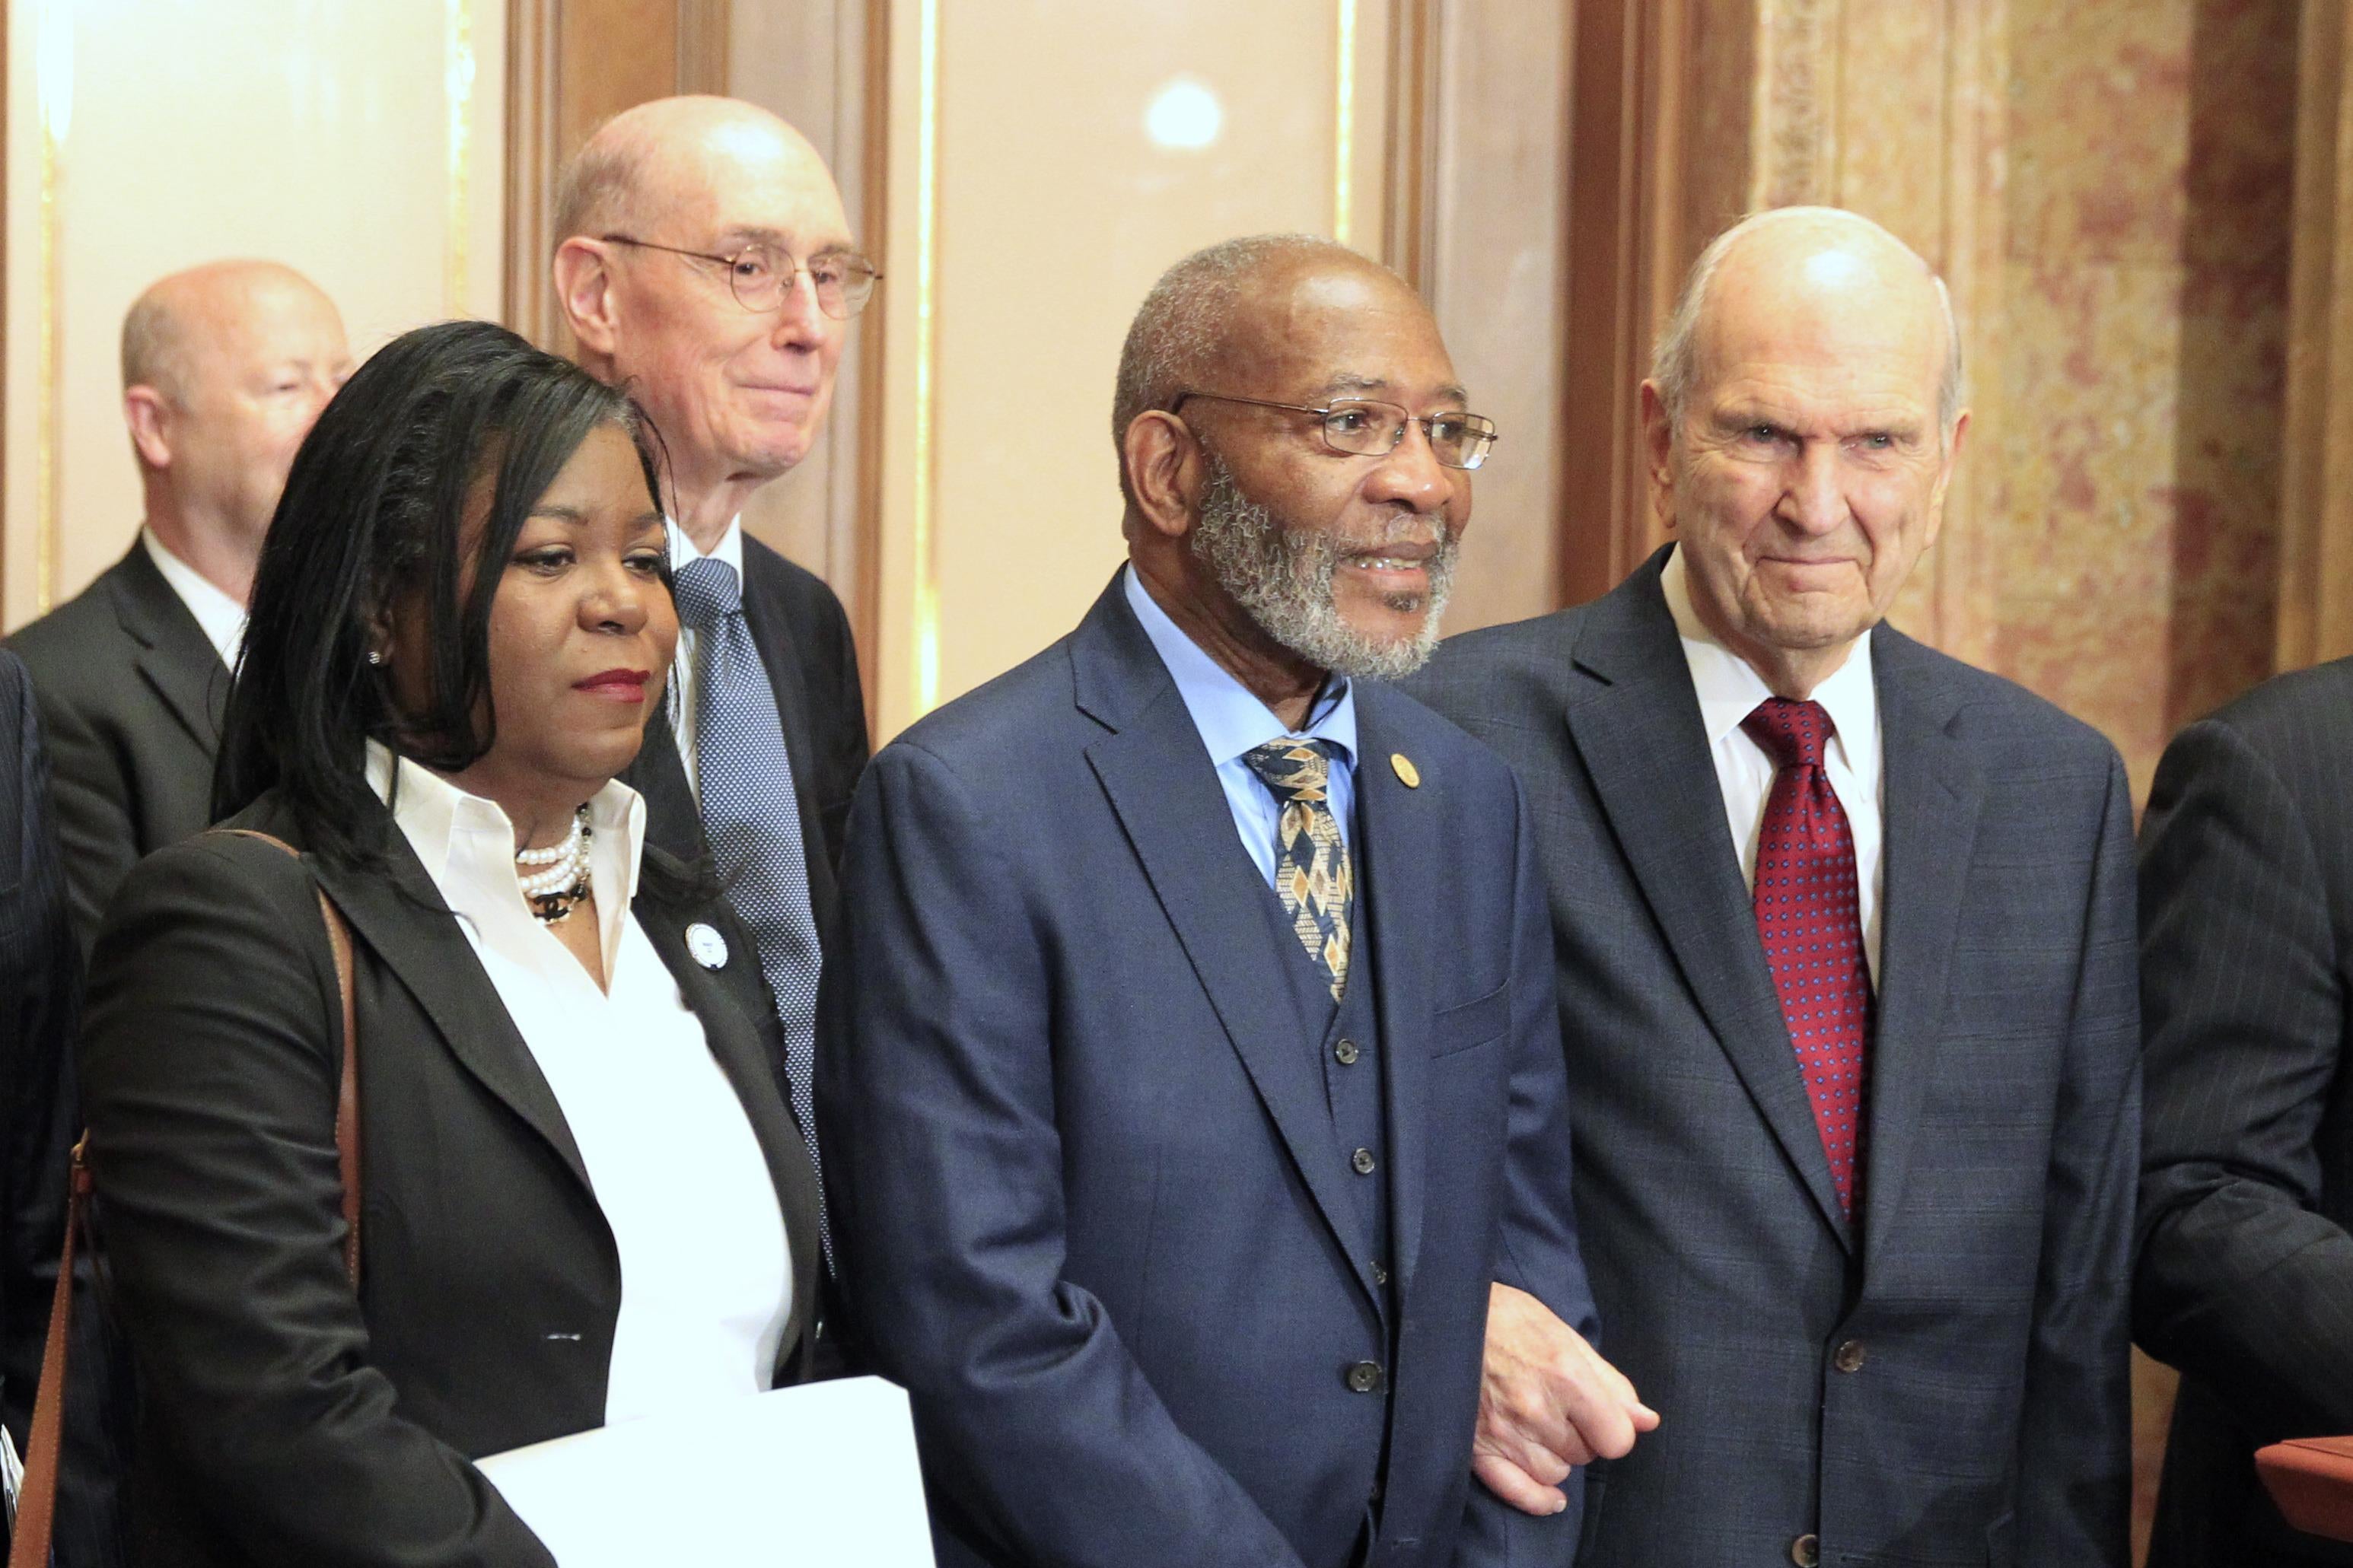 Reverend Theresa A. Dear, Henry B. Eyring Second Counselor in the First Presidency of the Mormon Church, Dr. Amos C. Brown Chairman of Interfaith relations for the NAACP and President of the Mormon Church Russell M. Nelson wait for a press conference to start at The Church of Jesus Christ of Latter Day Saints Administration Building on May 17, 2018 in Salt Lake City, Utah.